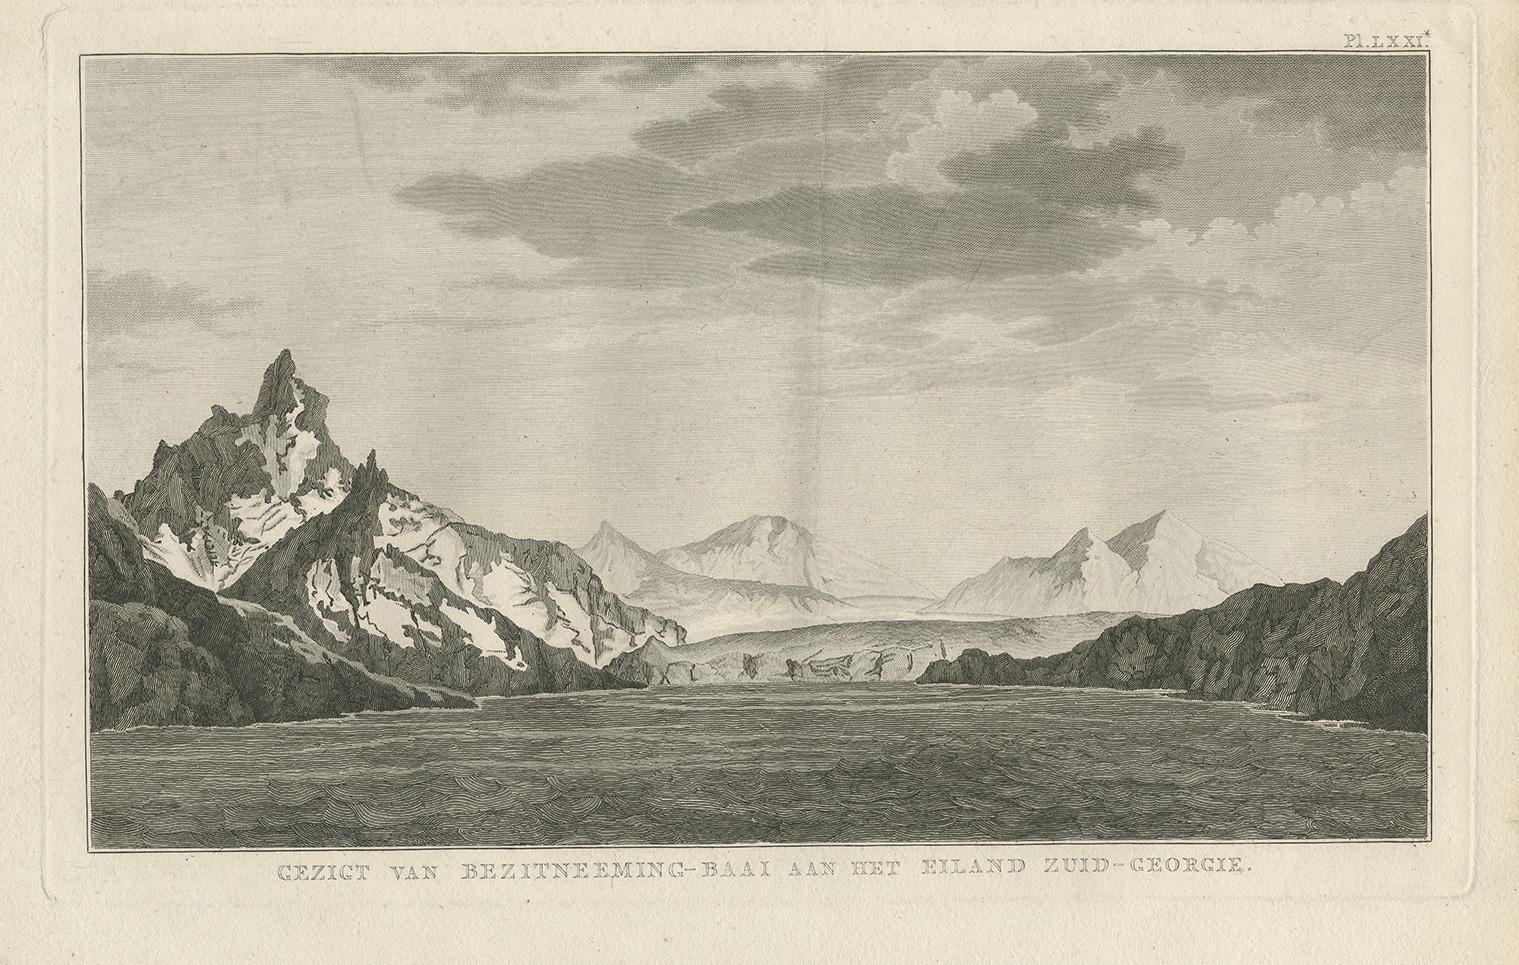 Antique print titled 'Gezigt van de Bezitneeming-Baai aan het Eiland Zuid-Georgie'. 

This print depicts a view of Possession Bay on South Georgia, with the glaciers. Originates from 'Reizen rondom de Waereld' by J. Cook. Translated by J.D. Pasteur.